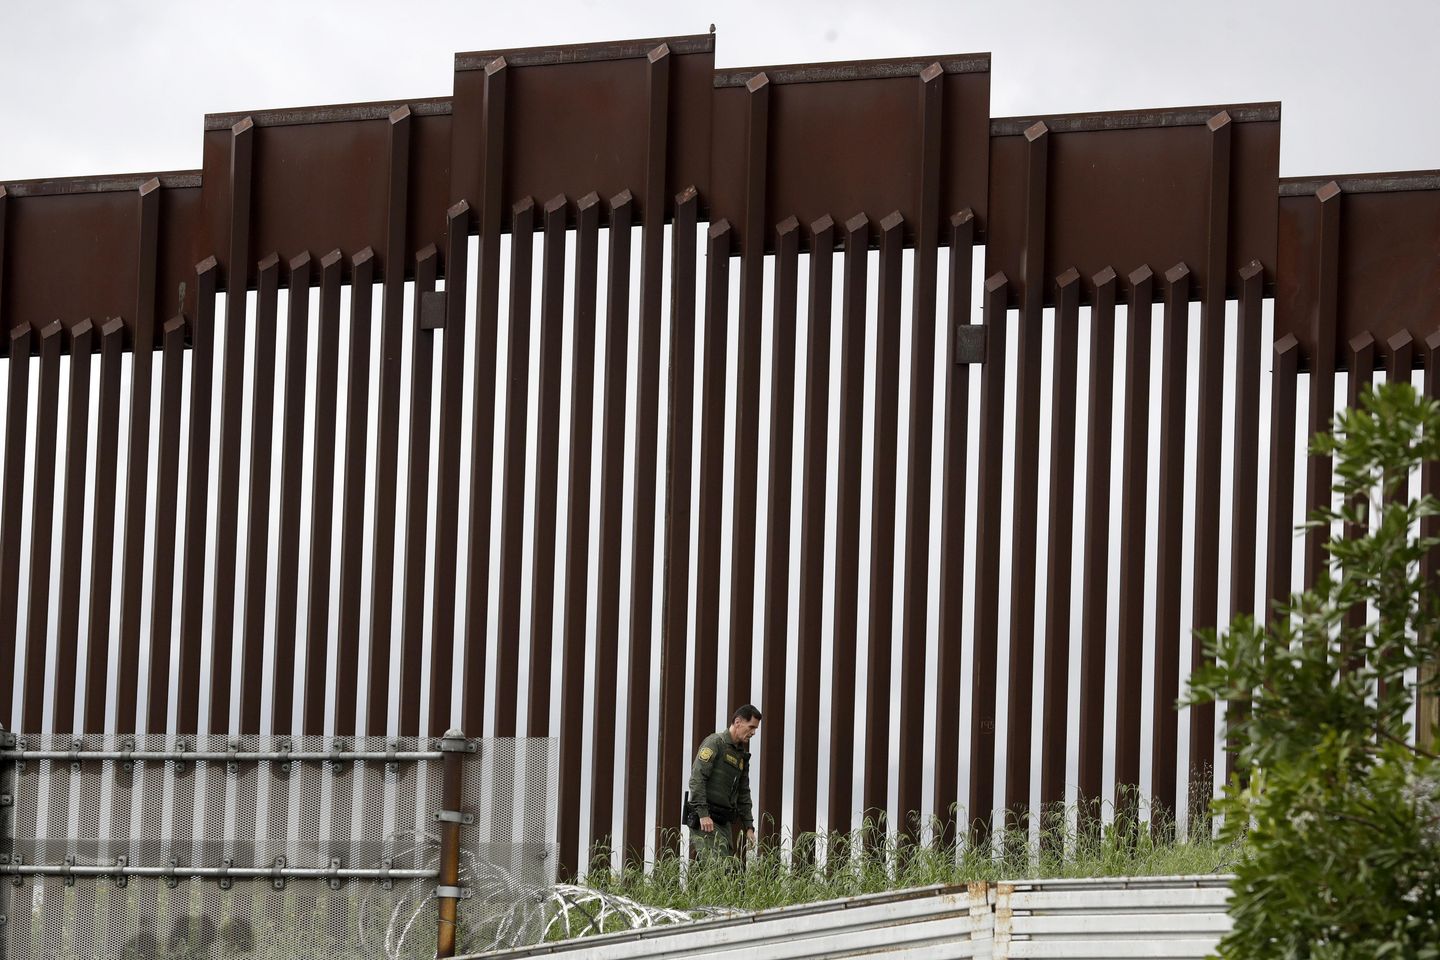 11 injured in falls from U.S.-Mexico border wall in single day